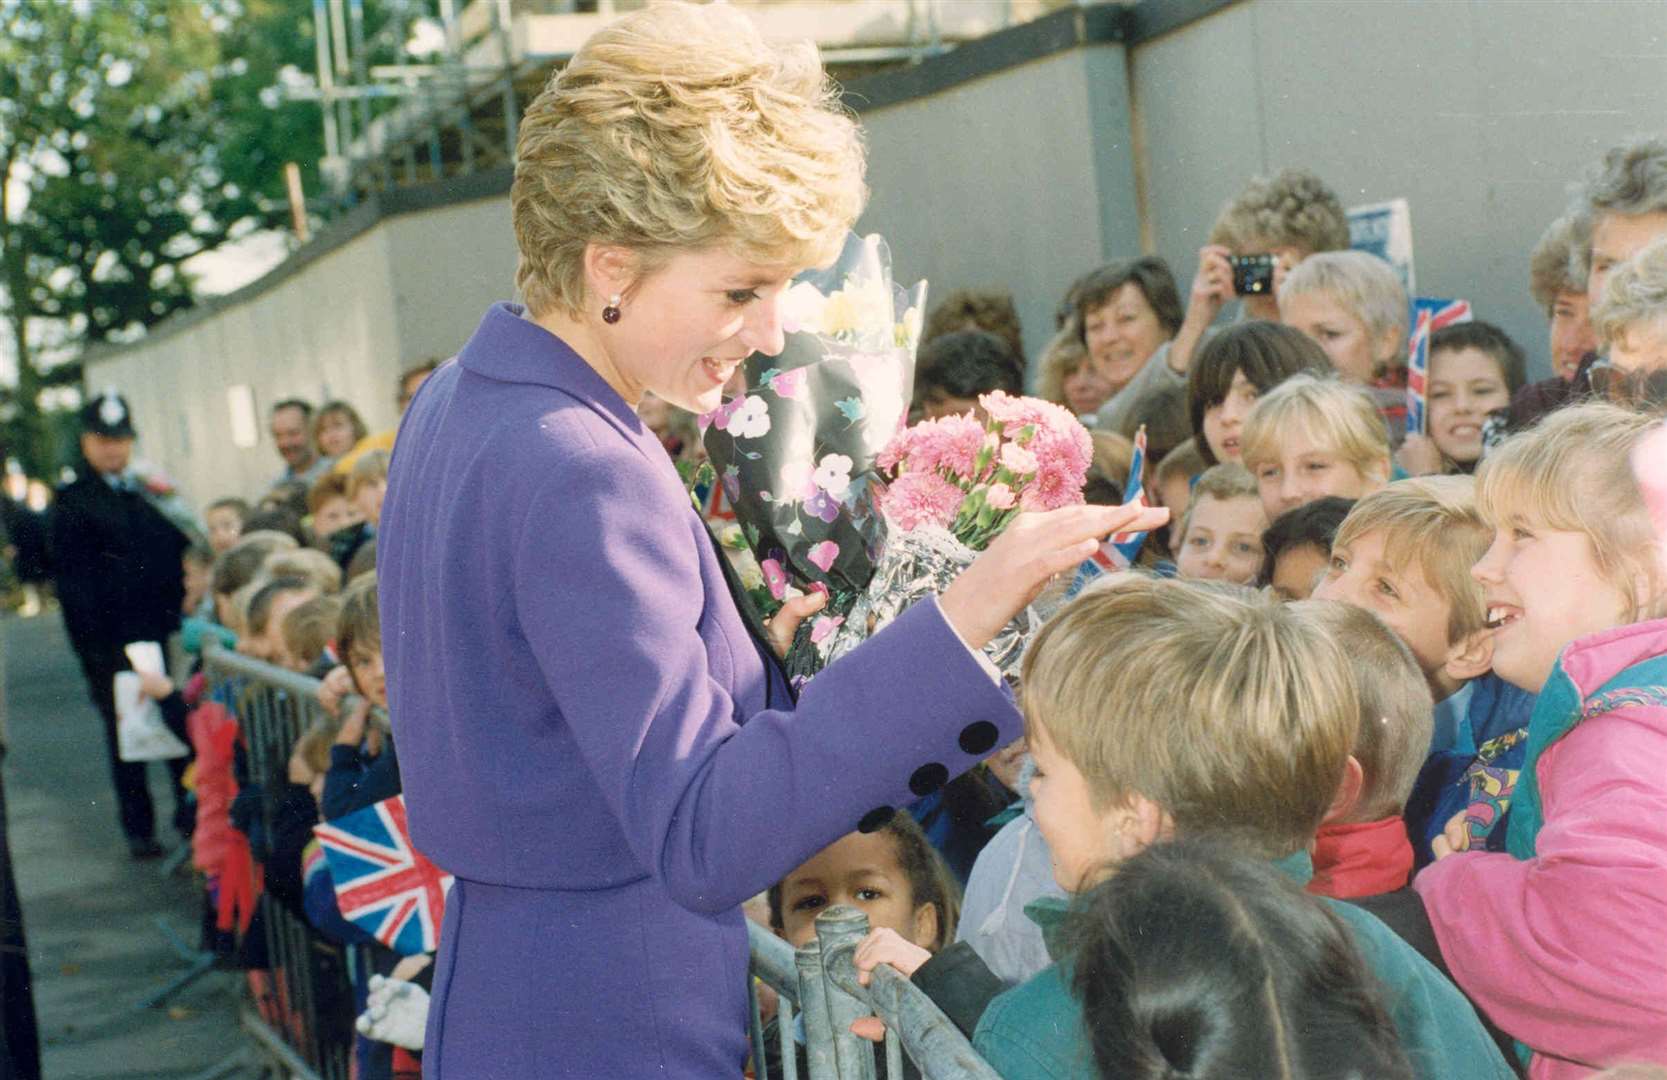 Pupils at St Peter's School waited two hours to greet Princess Diana outside Heart of Kent Hospice